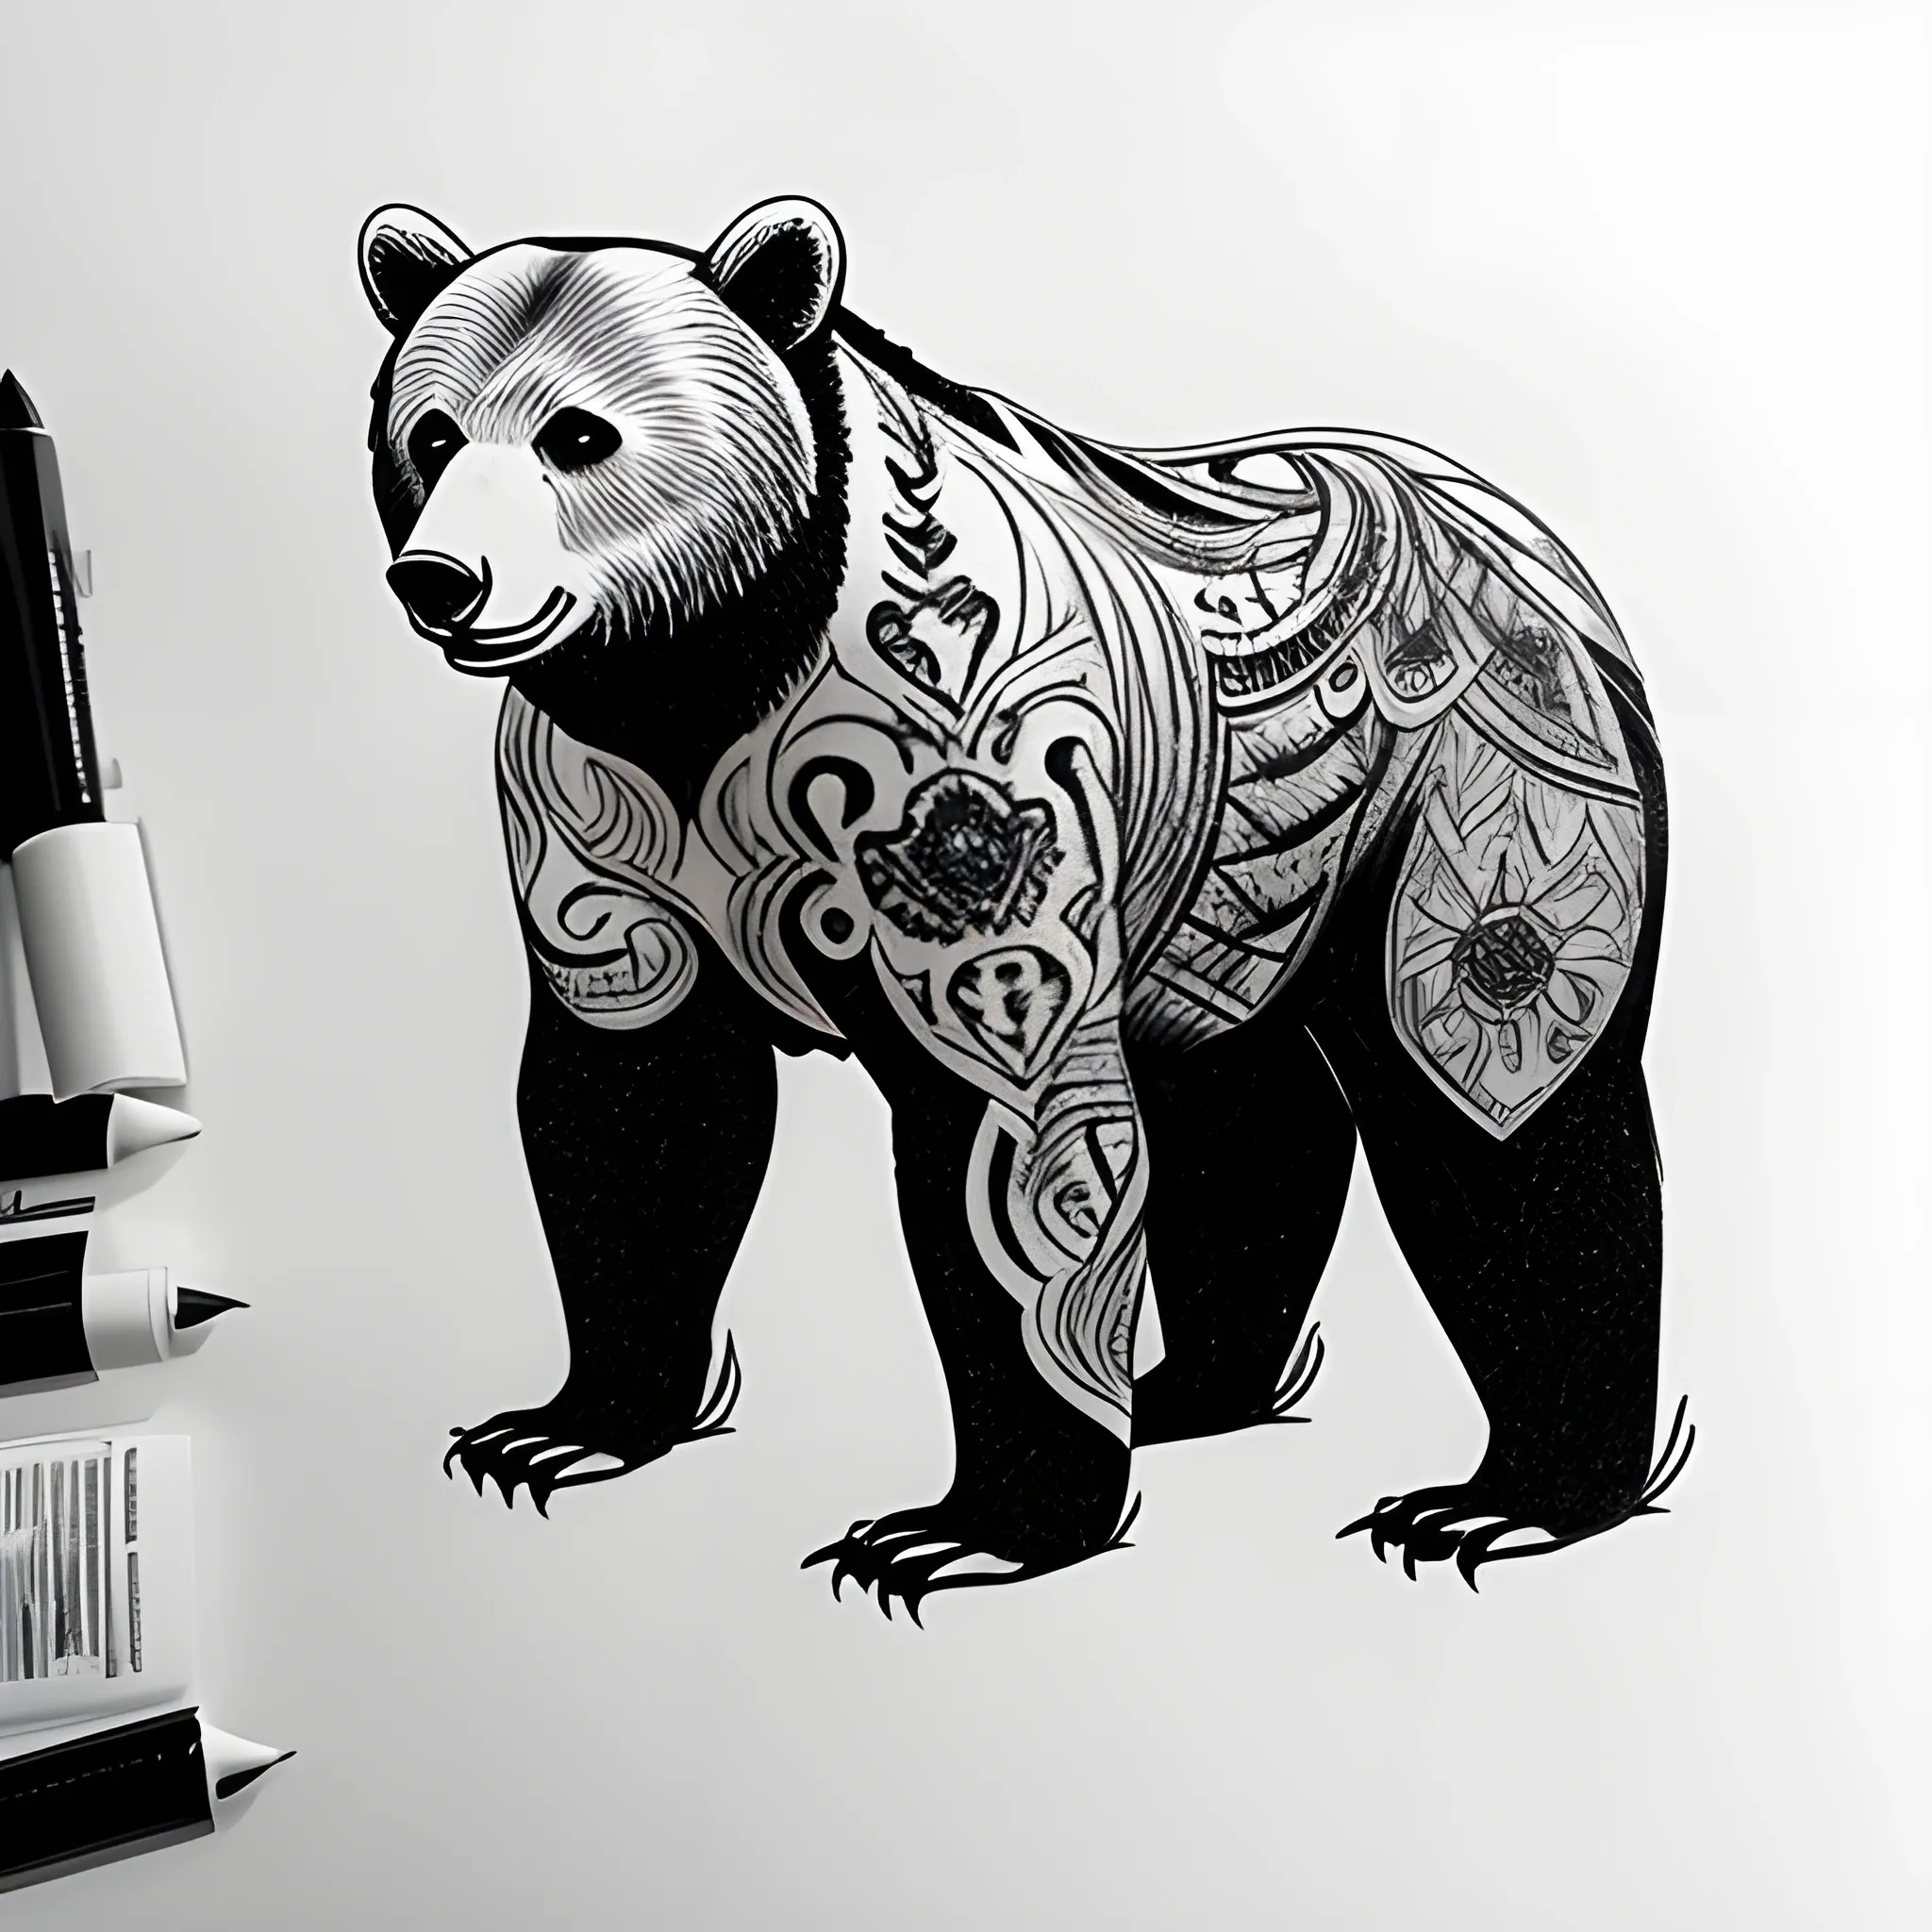 Bear Tattoo Design and Meanings - Strength, Courage and Confidence |  Geometric tattoo, Bear tattoo designs, Tattoo designs and meanings